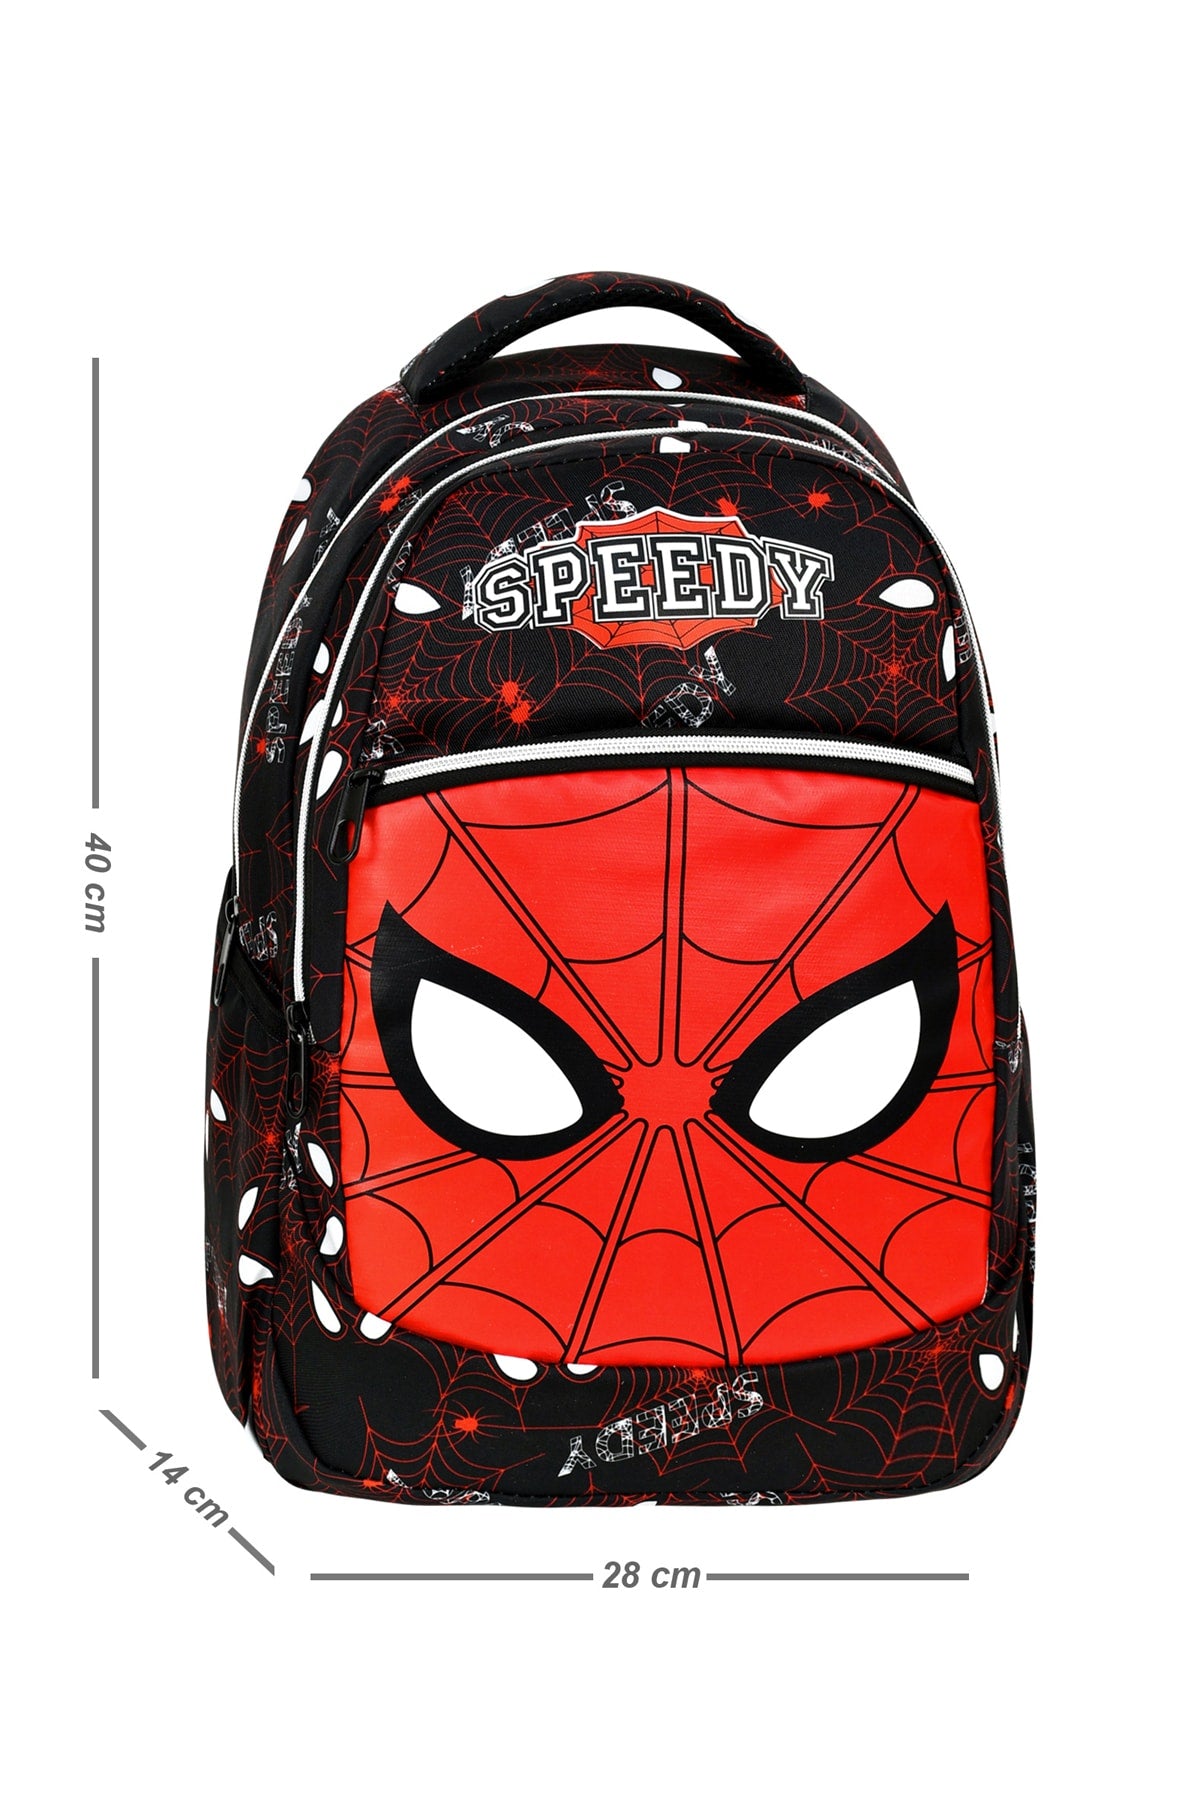 3-pack Primary School Spider-Man Patterned School Bag for Boys with Food and Pencil Holder